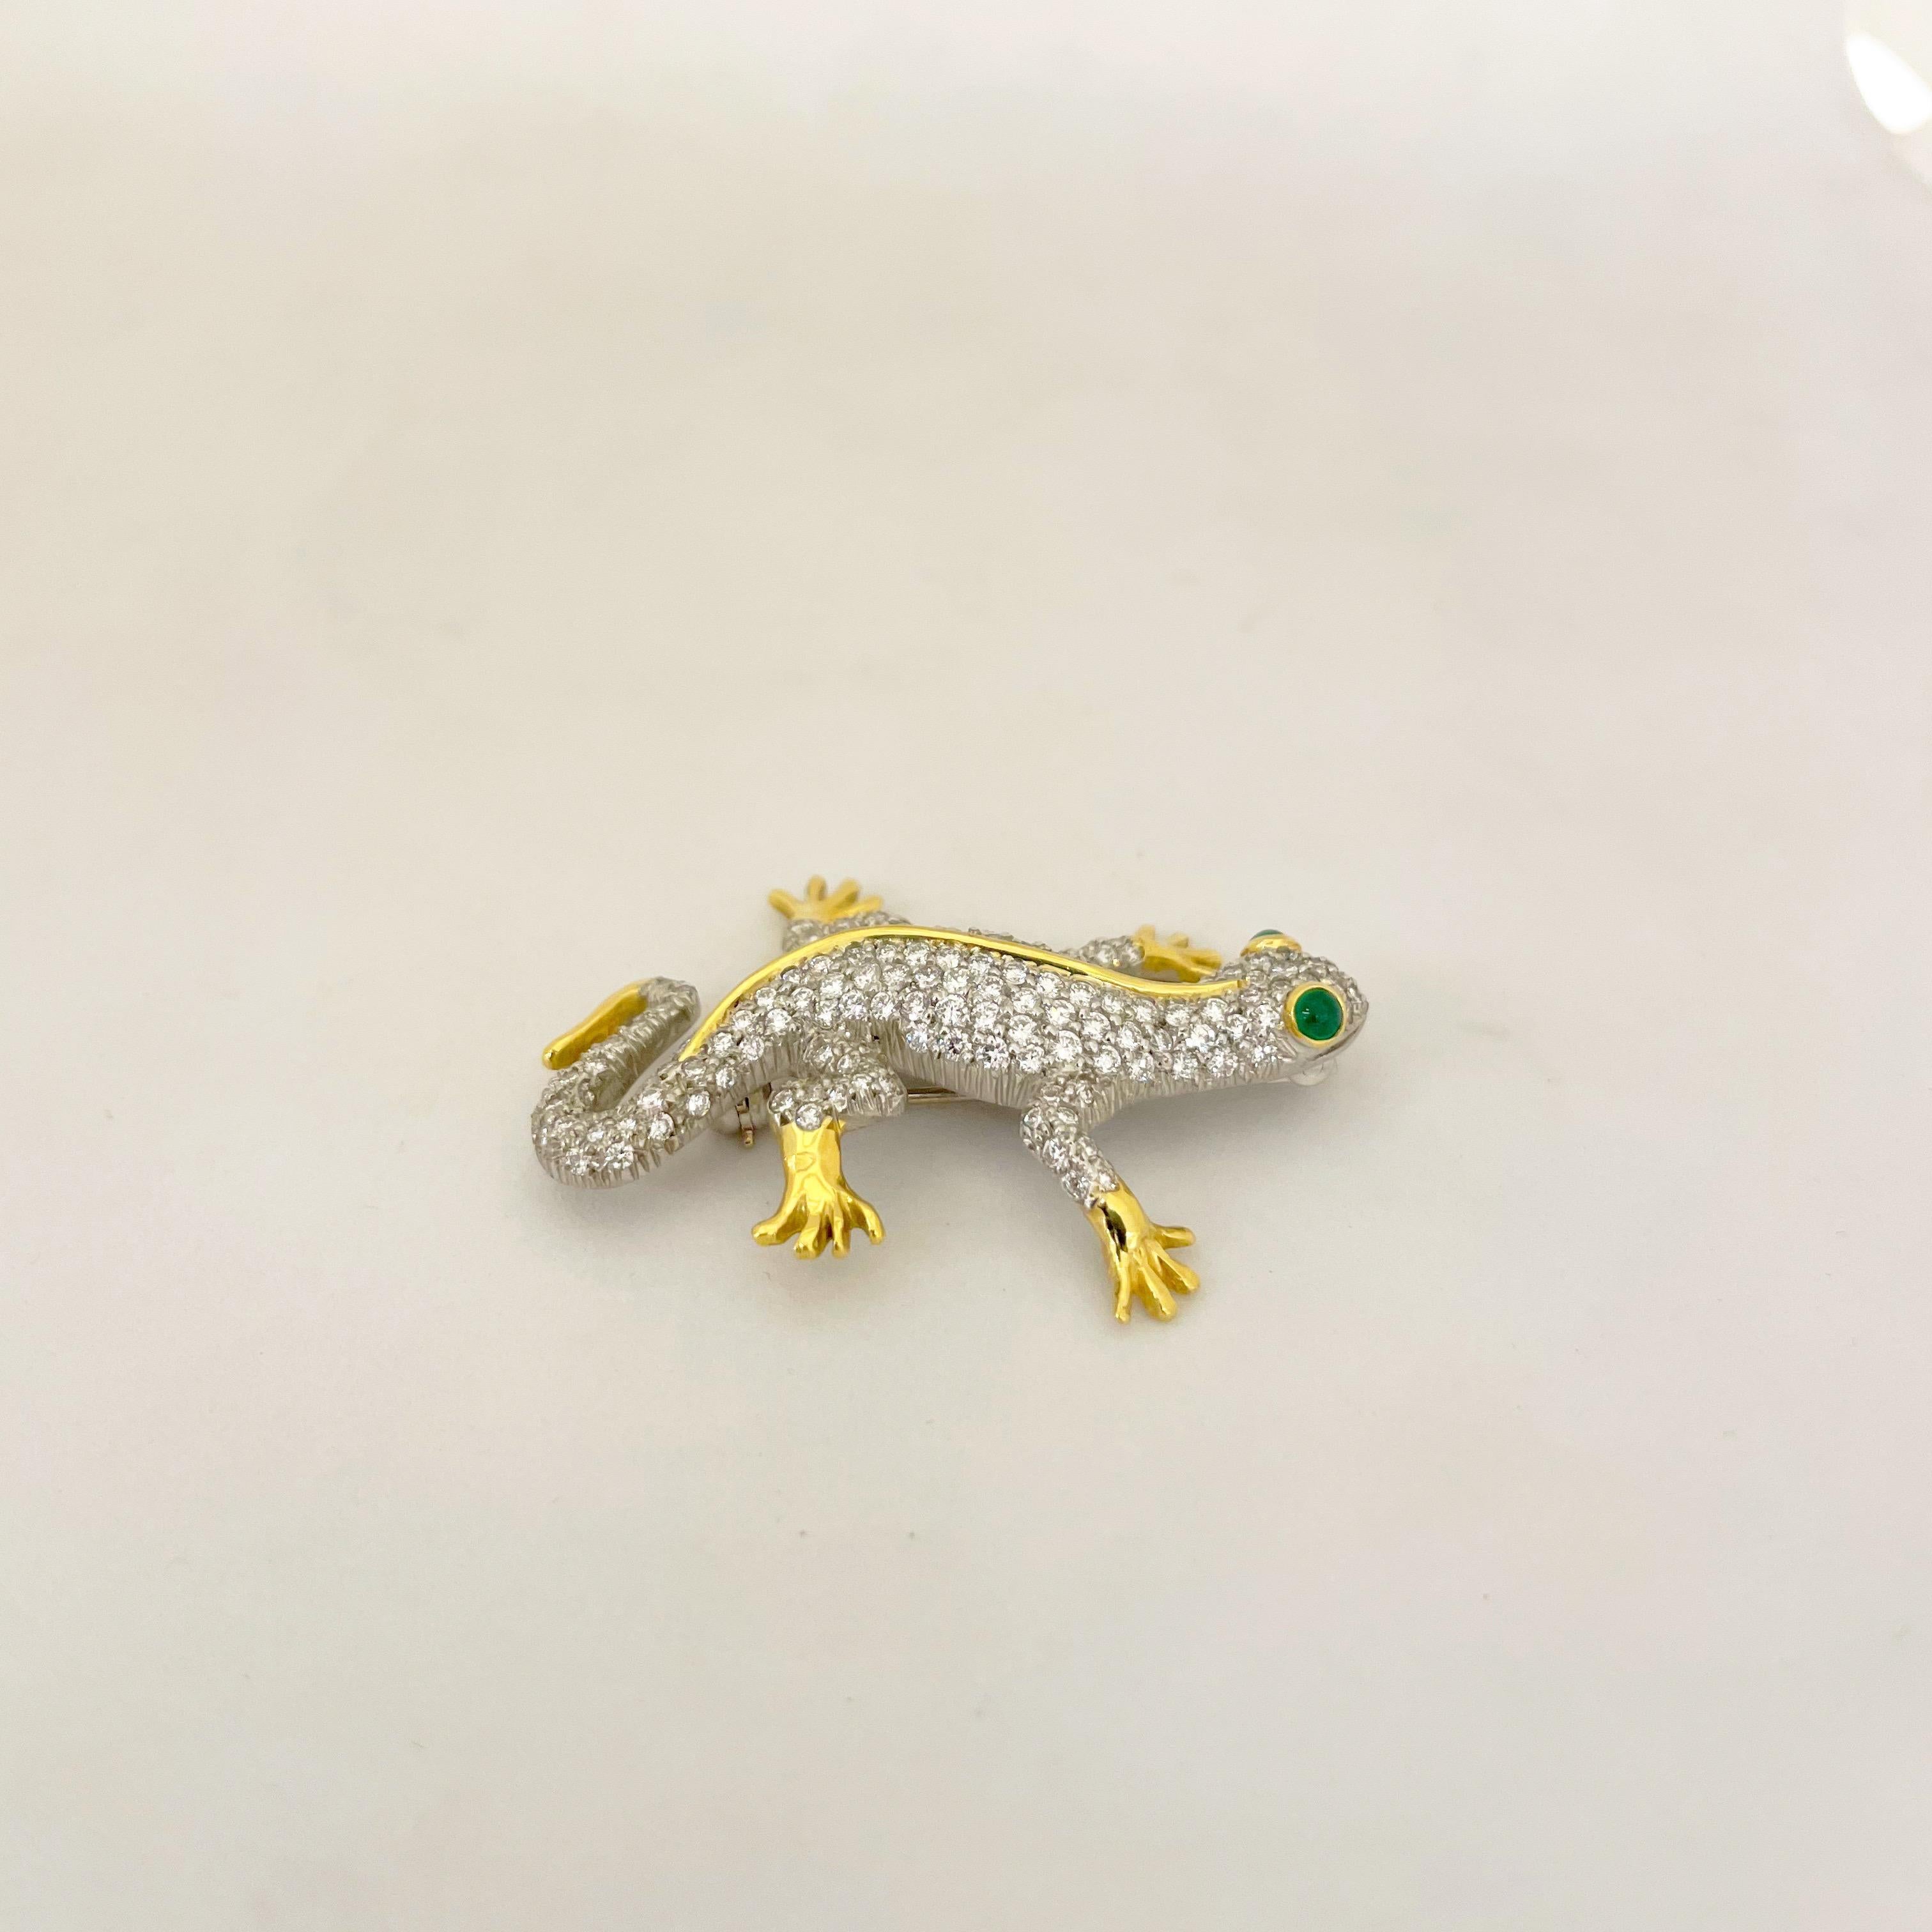 This adorable Cellini  platinum and 18 karat yellow gold salamander brooch is beautifully set with round brilliant diamonds. His body is detailed with hi polished yellow gold for his feet and spine. His eyes are set with cabochon emerald eyes. The